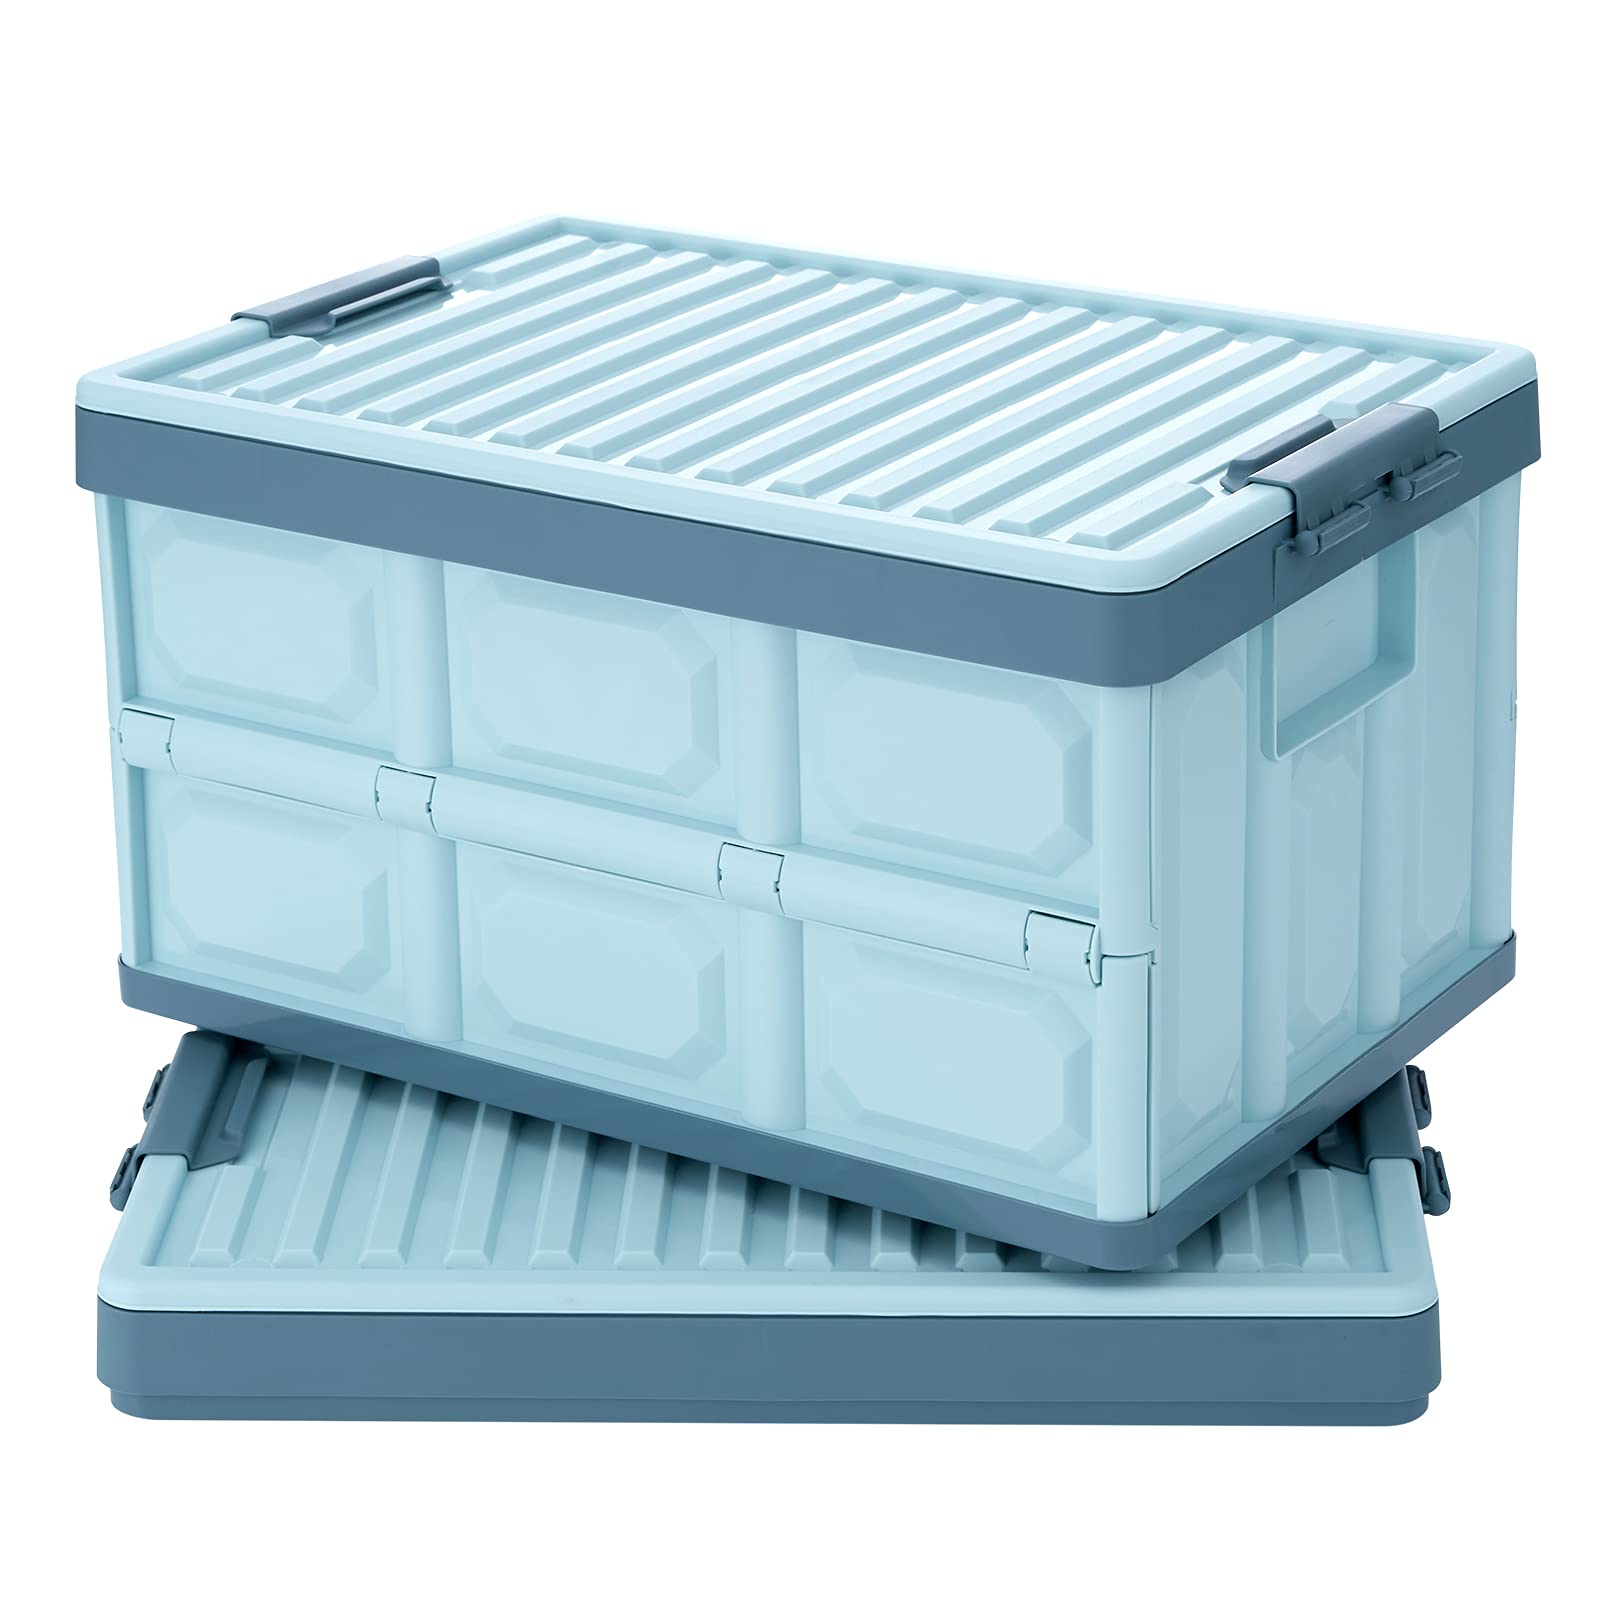 JUJIAJIA Blue Folding Plastic Stackable Utility Crates 2-Pack, Collapsible Storage Bins with Lids 30L, Durable Containers for Home & Garage Organization